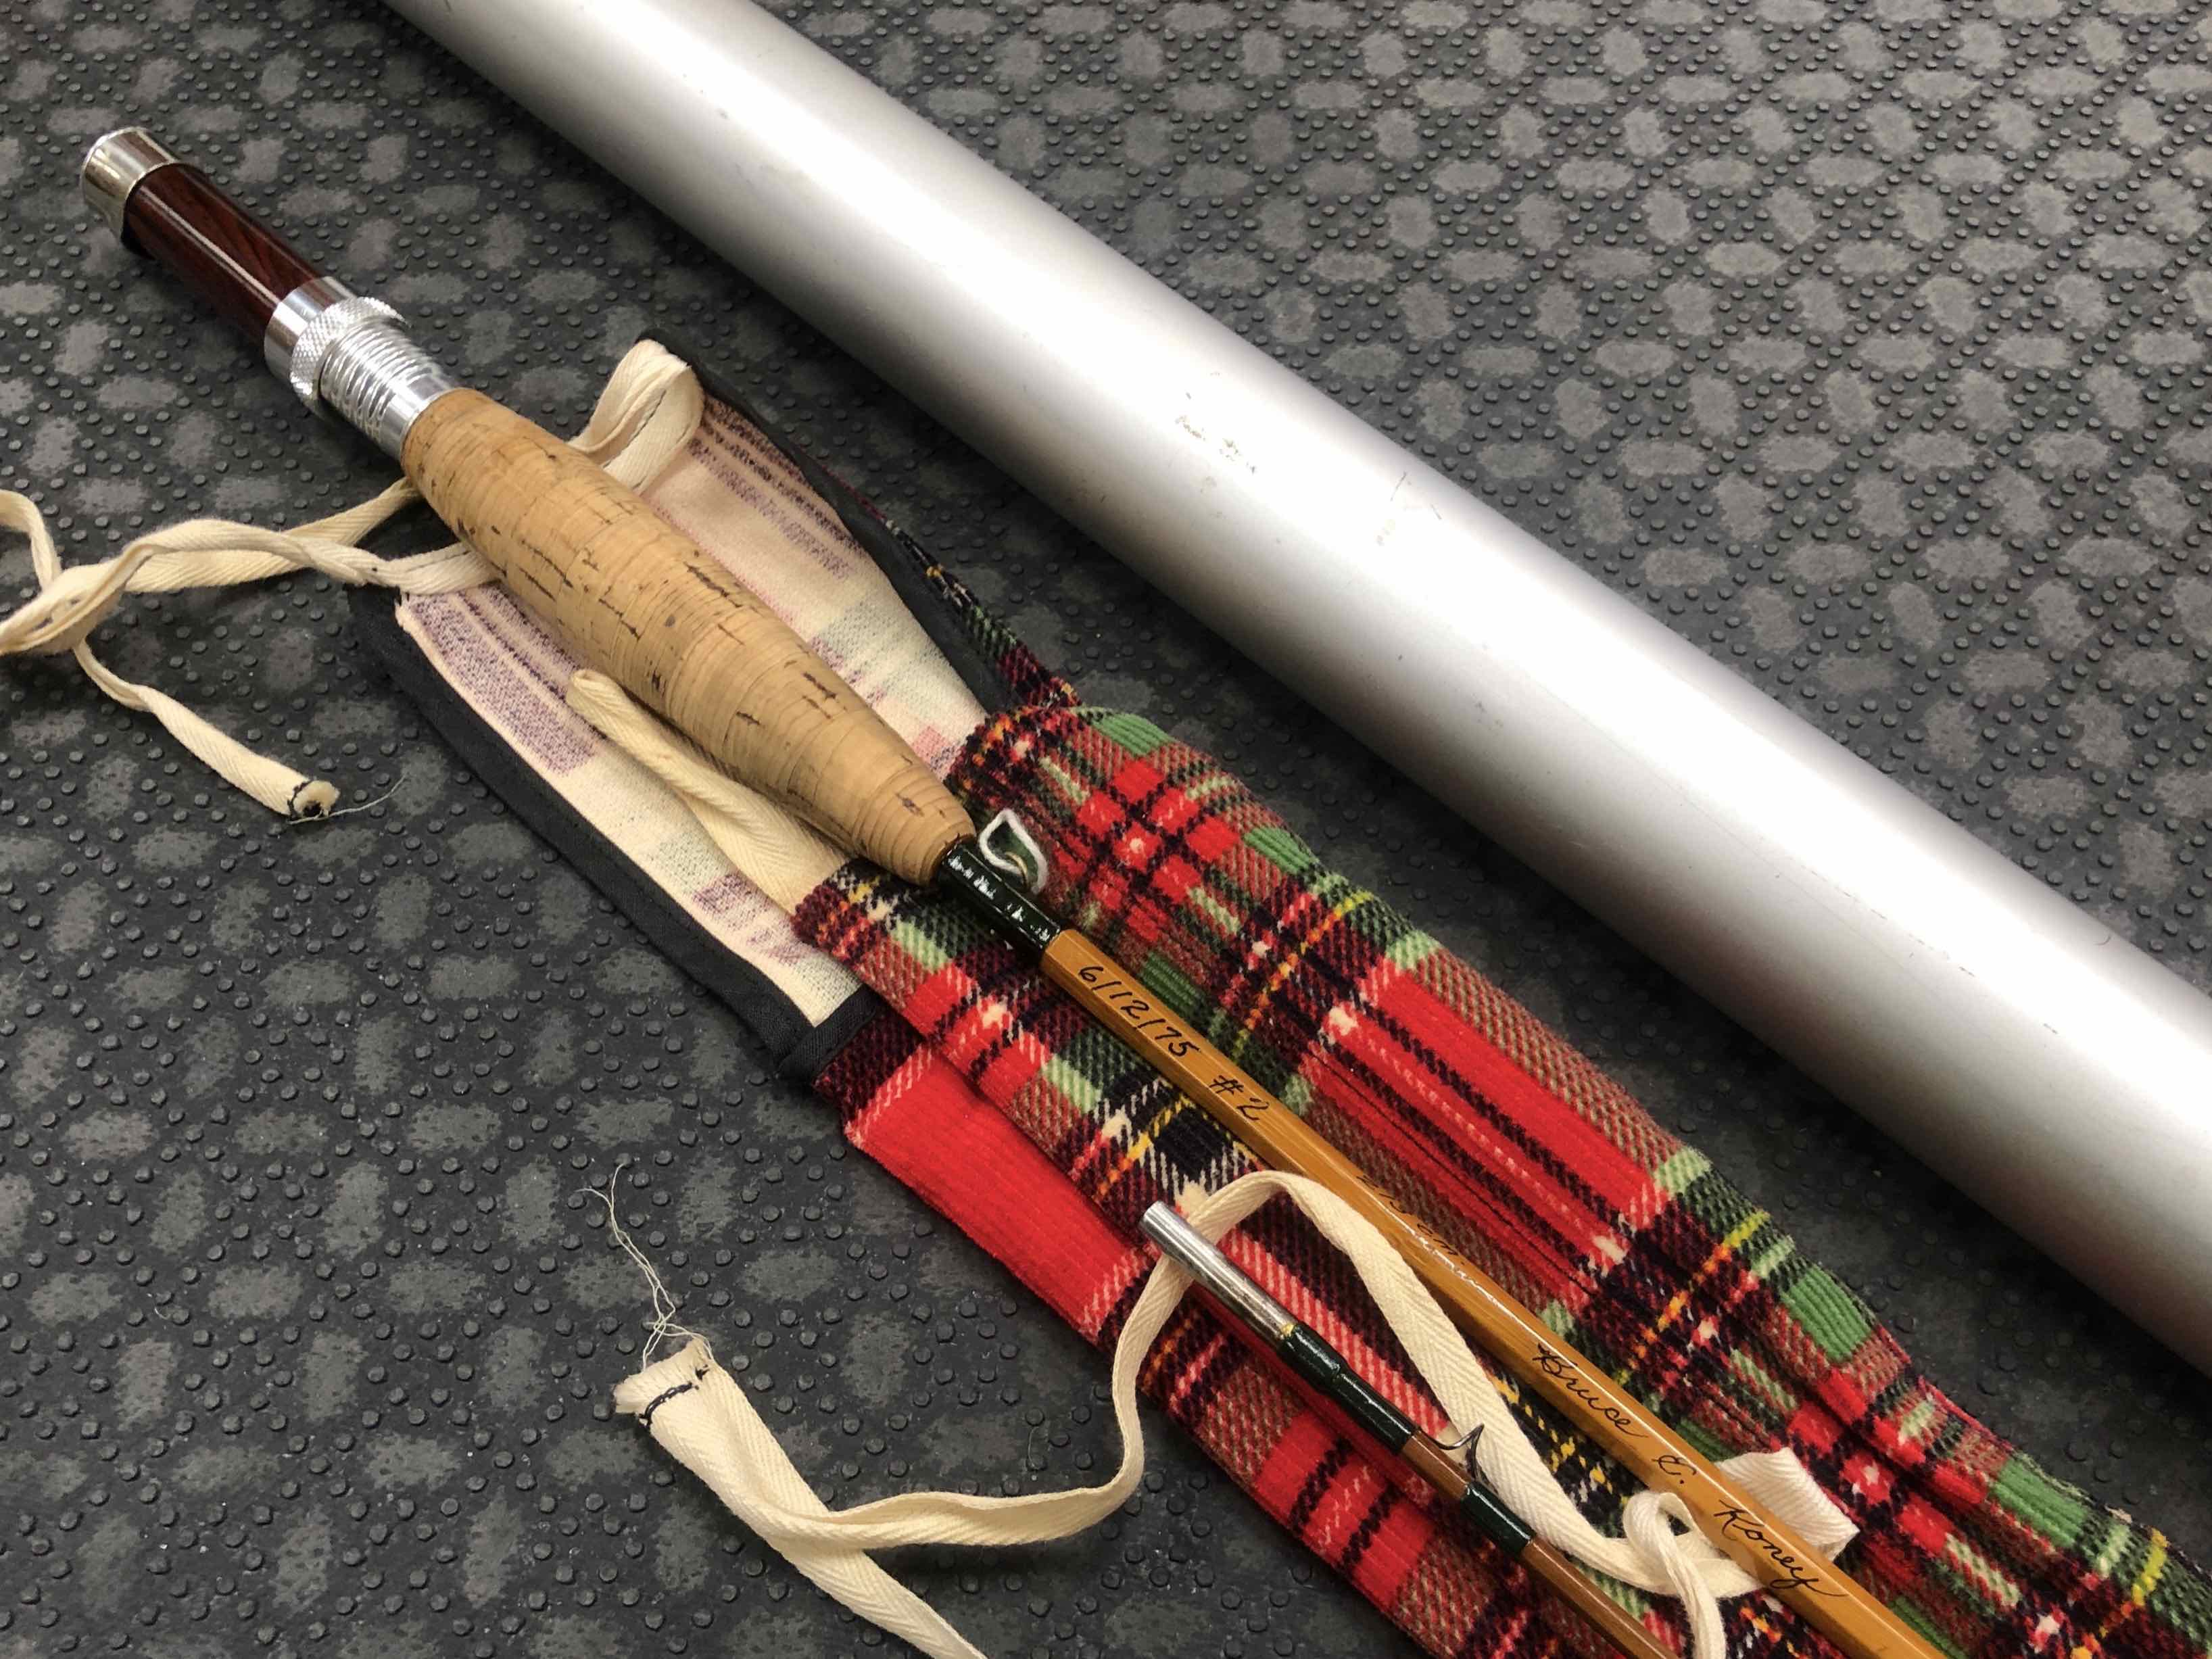 Bamboo Cane Rod Fly Rod - Built by Owner From Genuine Tonkin Cane in 1975 - 2Pc - 6 1/2’ - 4Wt - C/W Sock & Aluminum Tube - BEAUTIFUL CONDITION! - $300